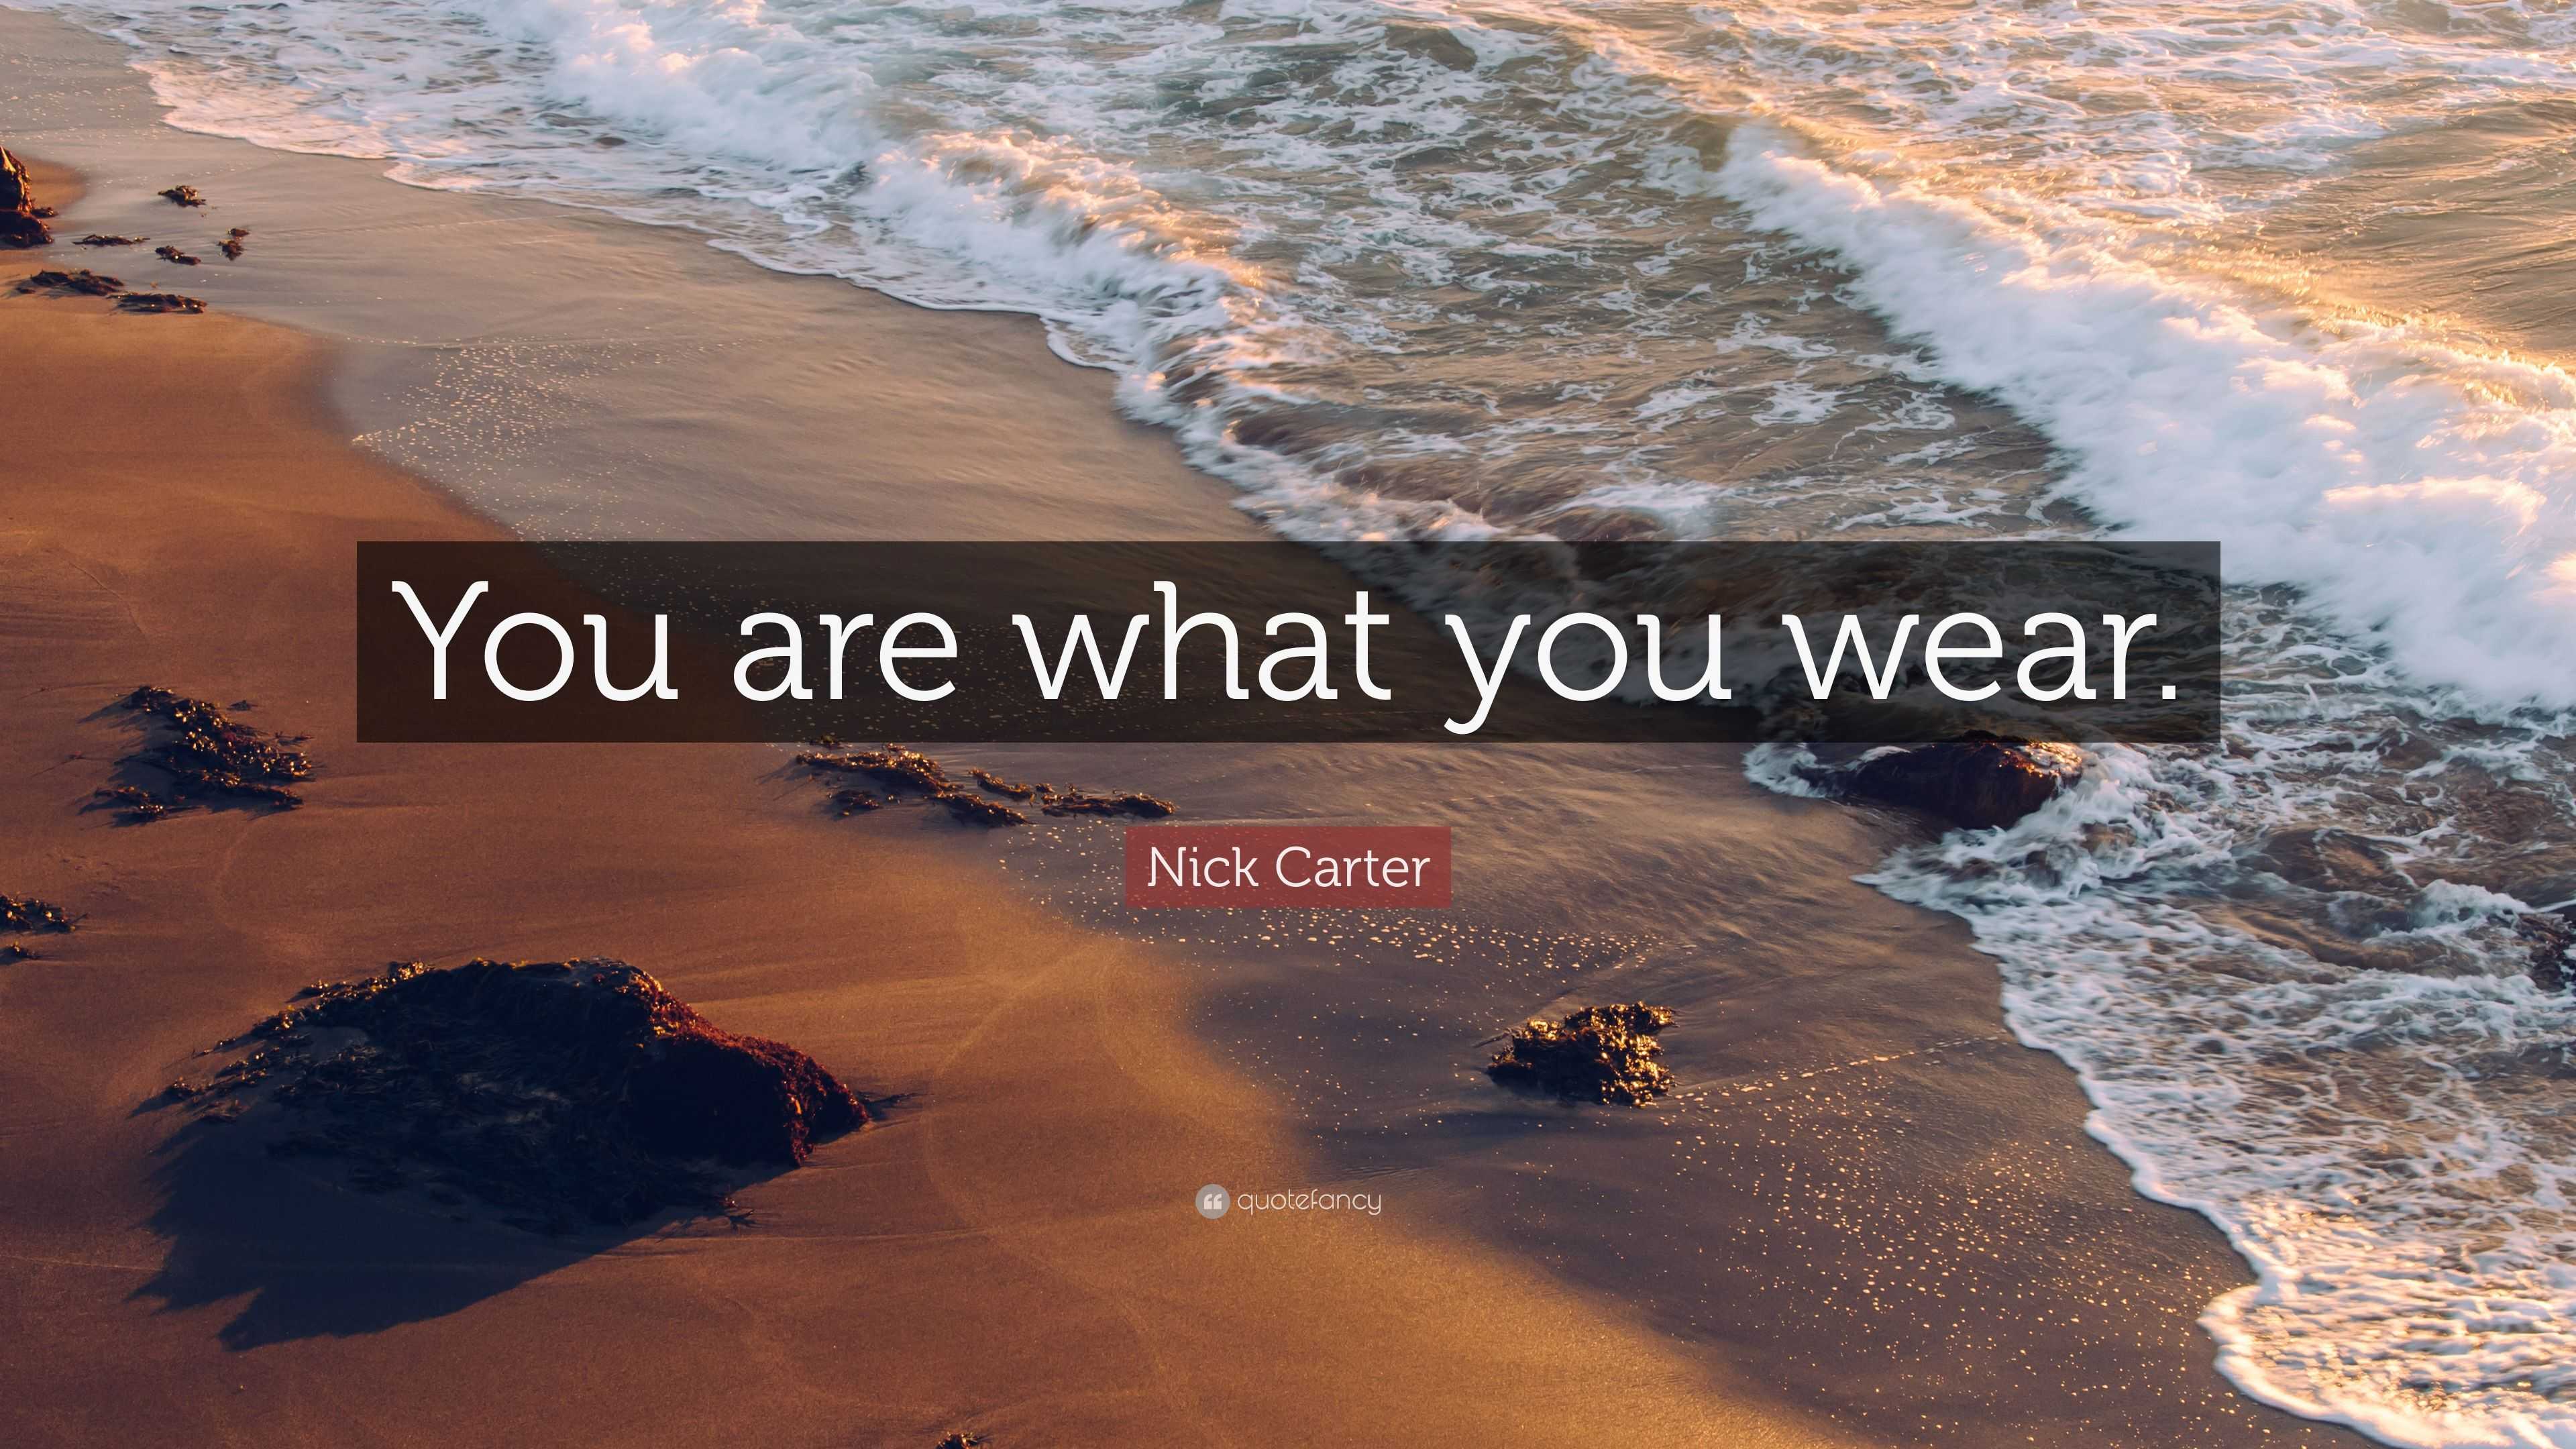 Nick Carter Quote: “You are what you wear.”